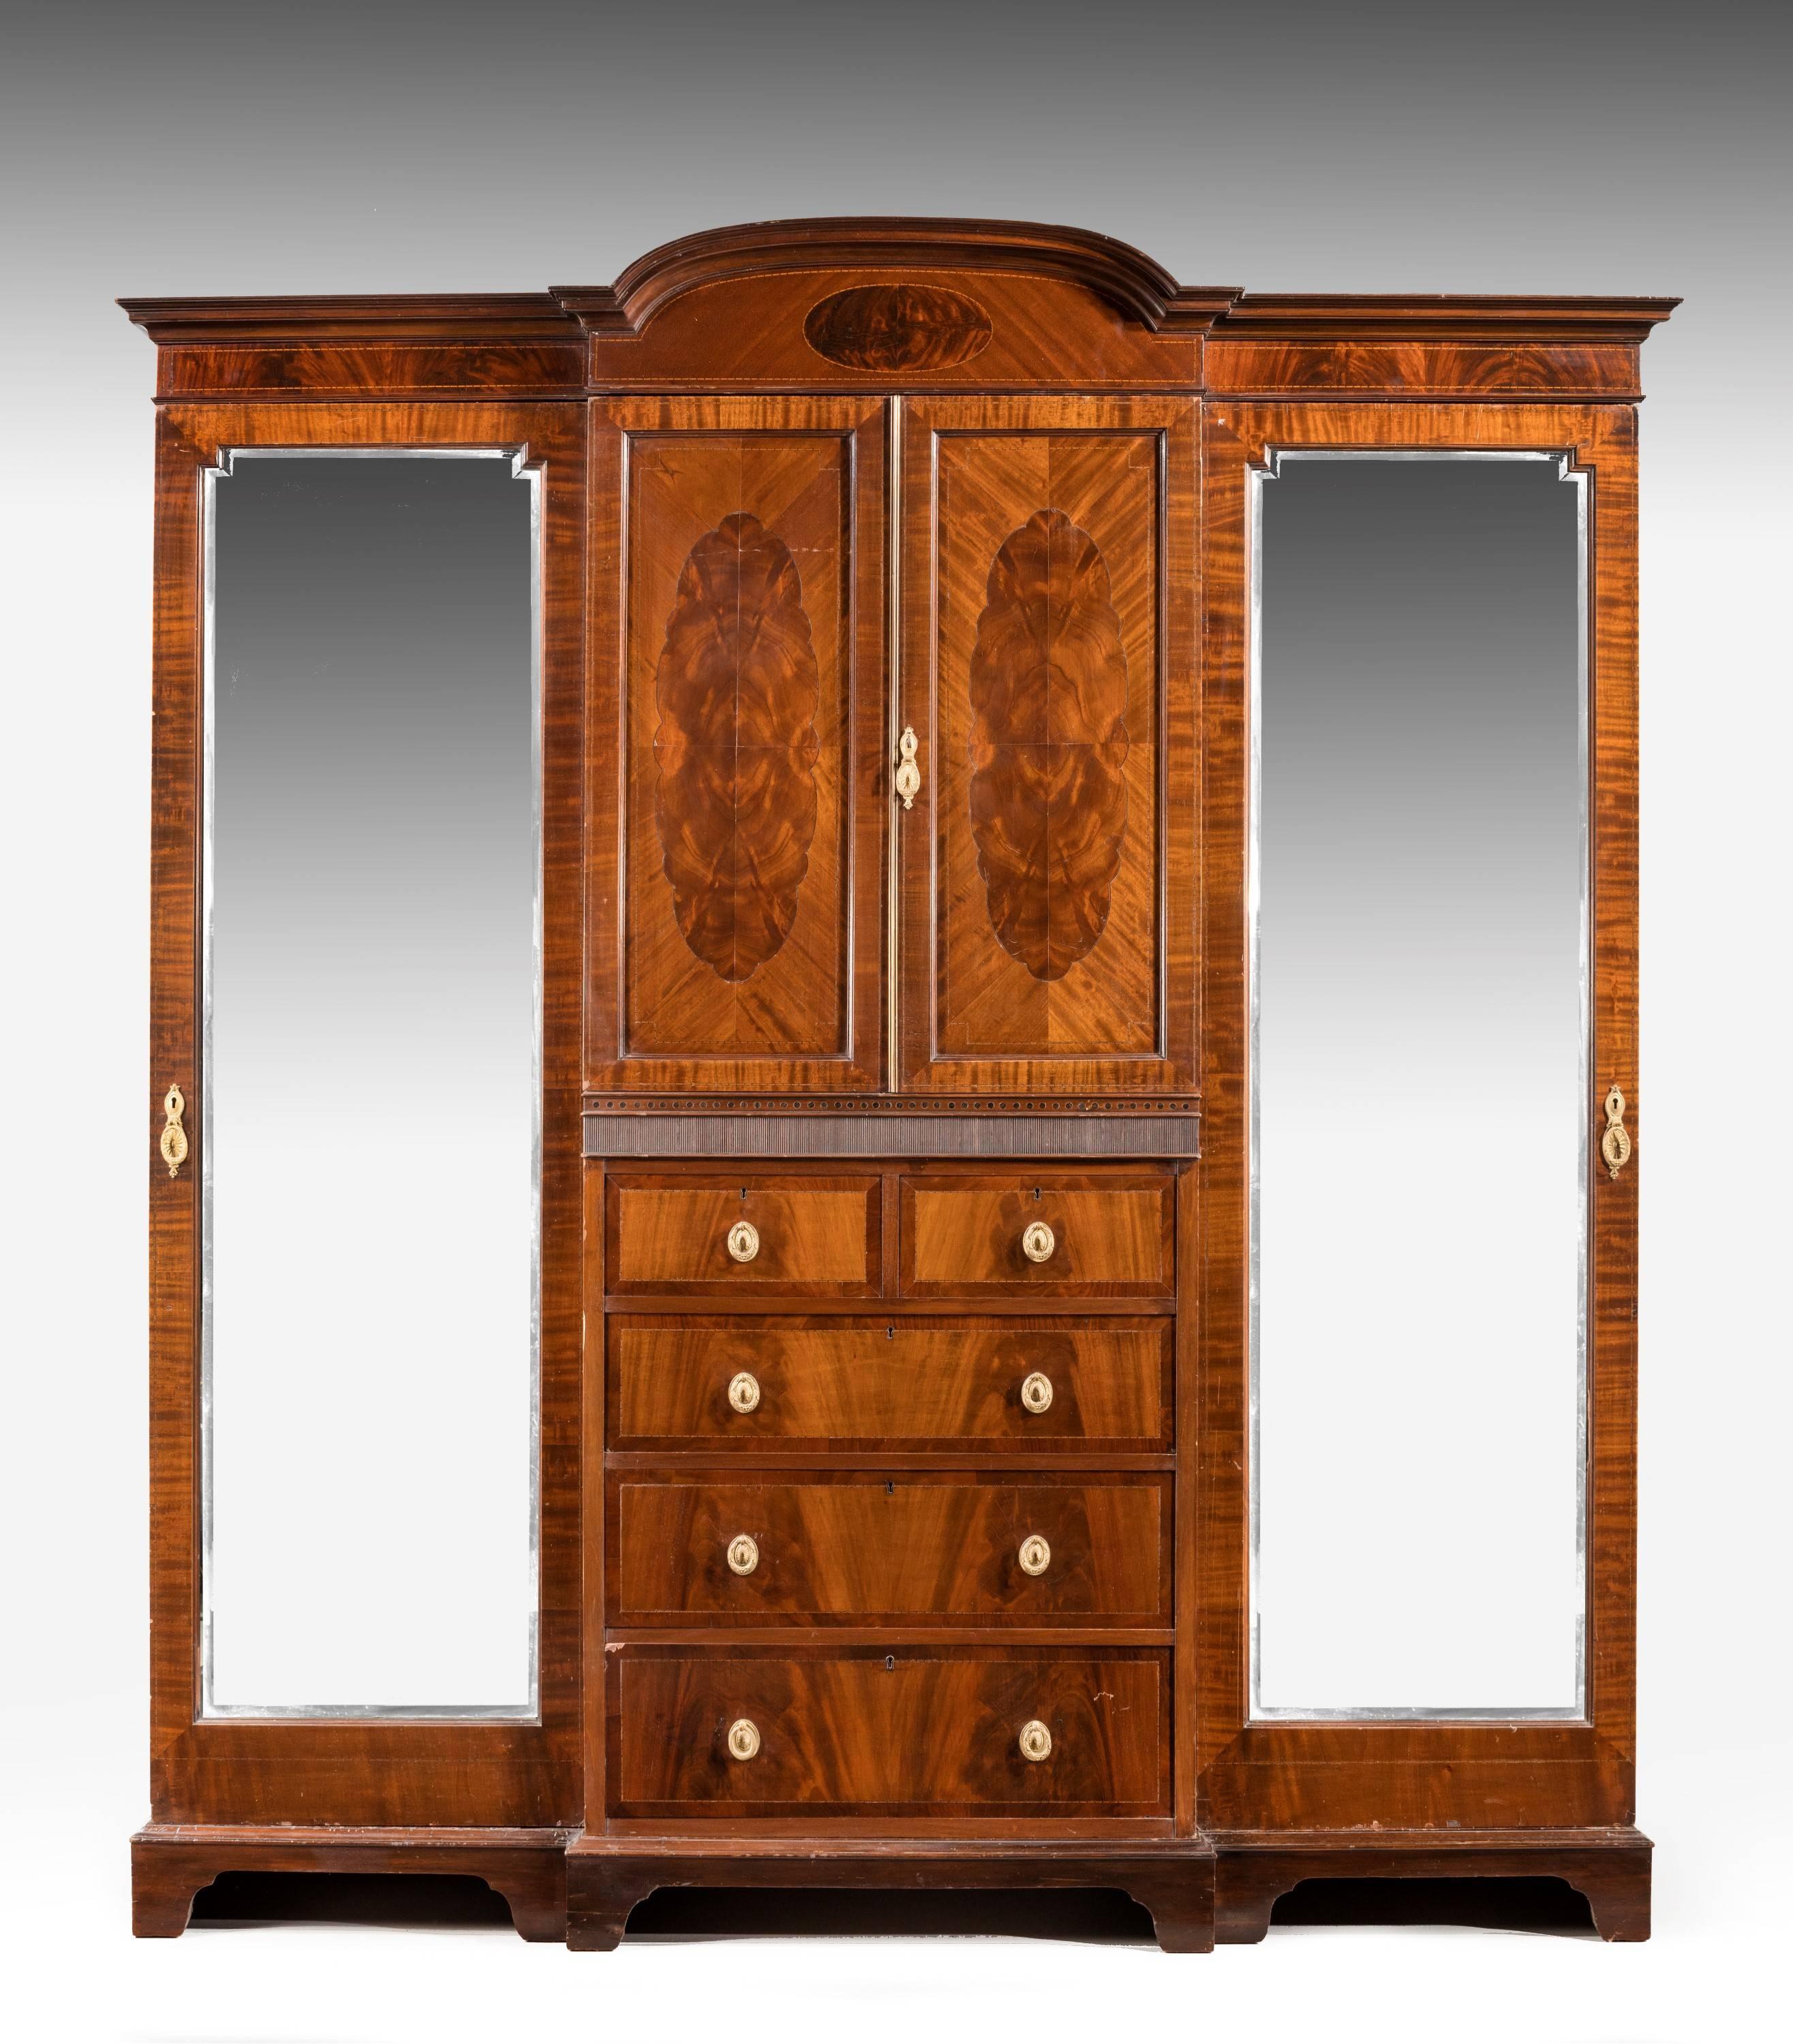 A good quality mahogany breakfront Wardrobe. With very finely figured contrasting quartered panels to the upper doors. Retaining original oval cast gilt bronze handles.